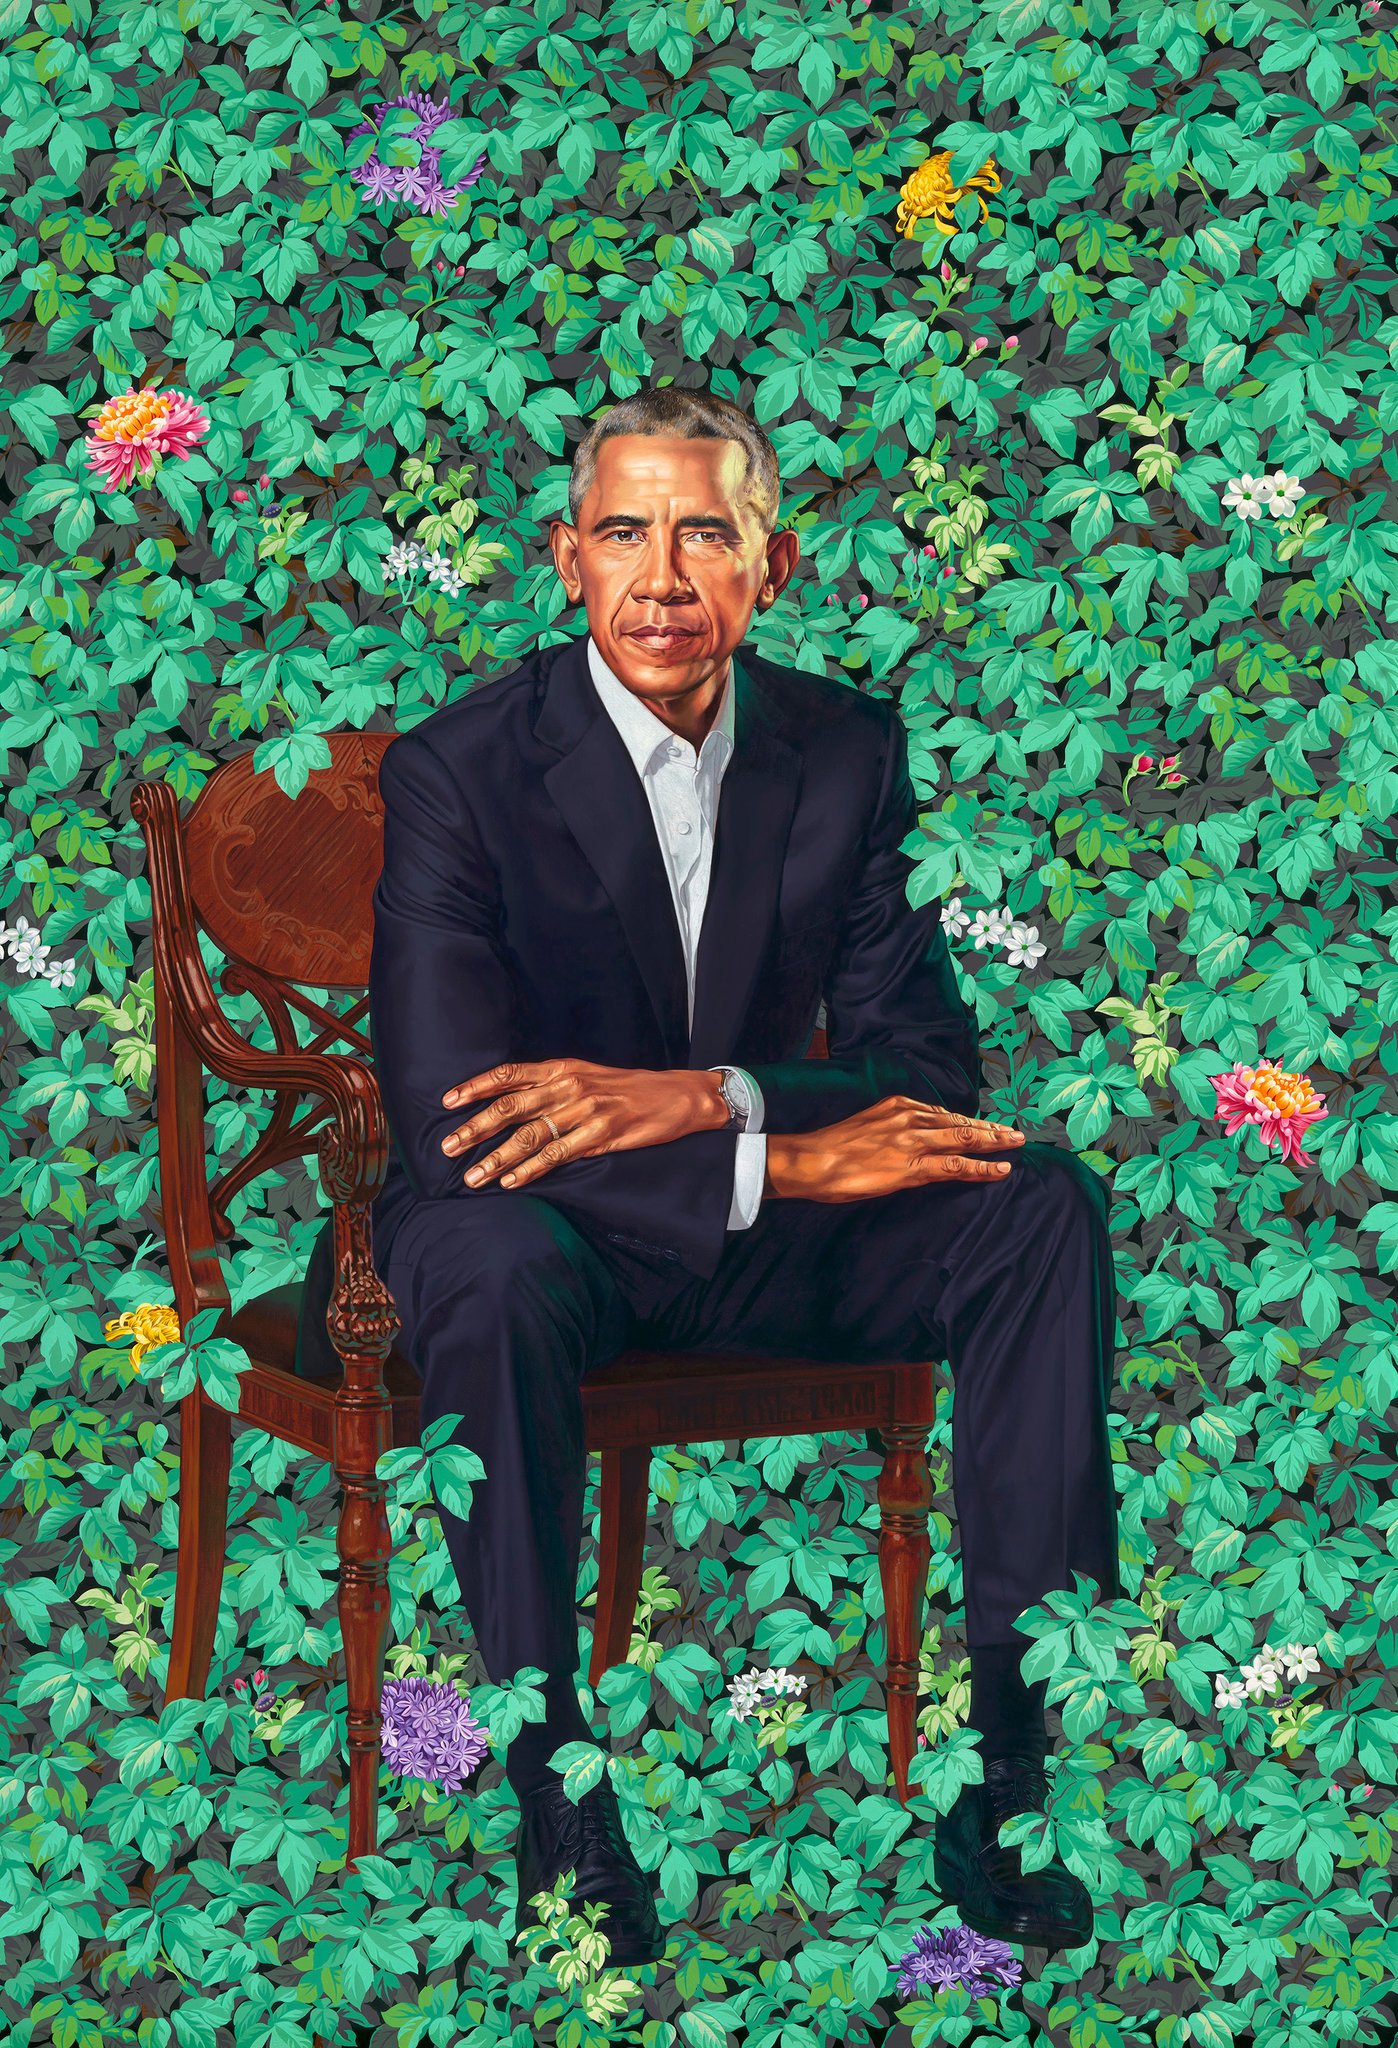 Presidential portrait of Barack Obama by Kehinde Wiley.